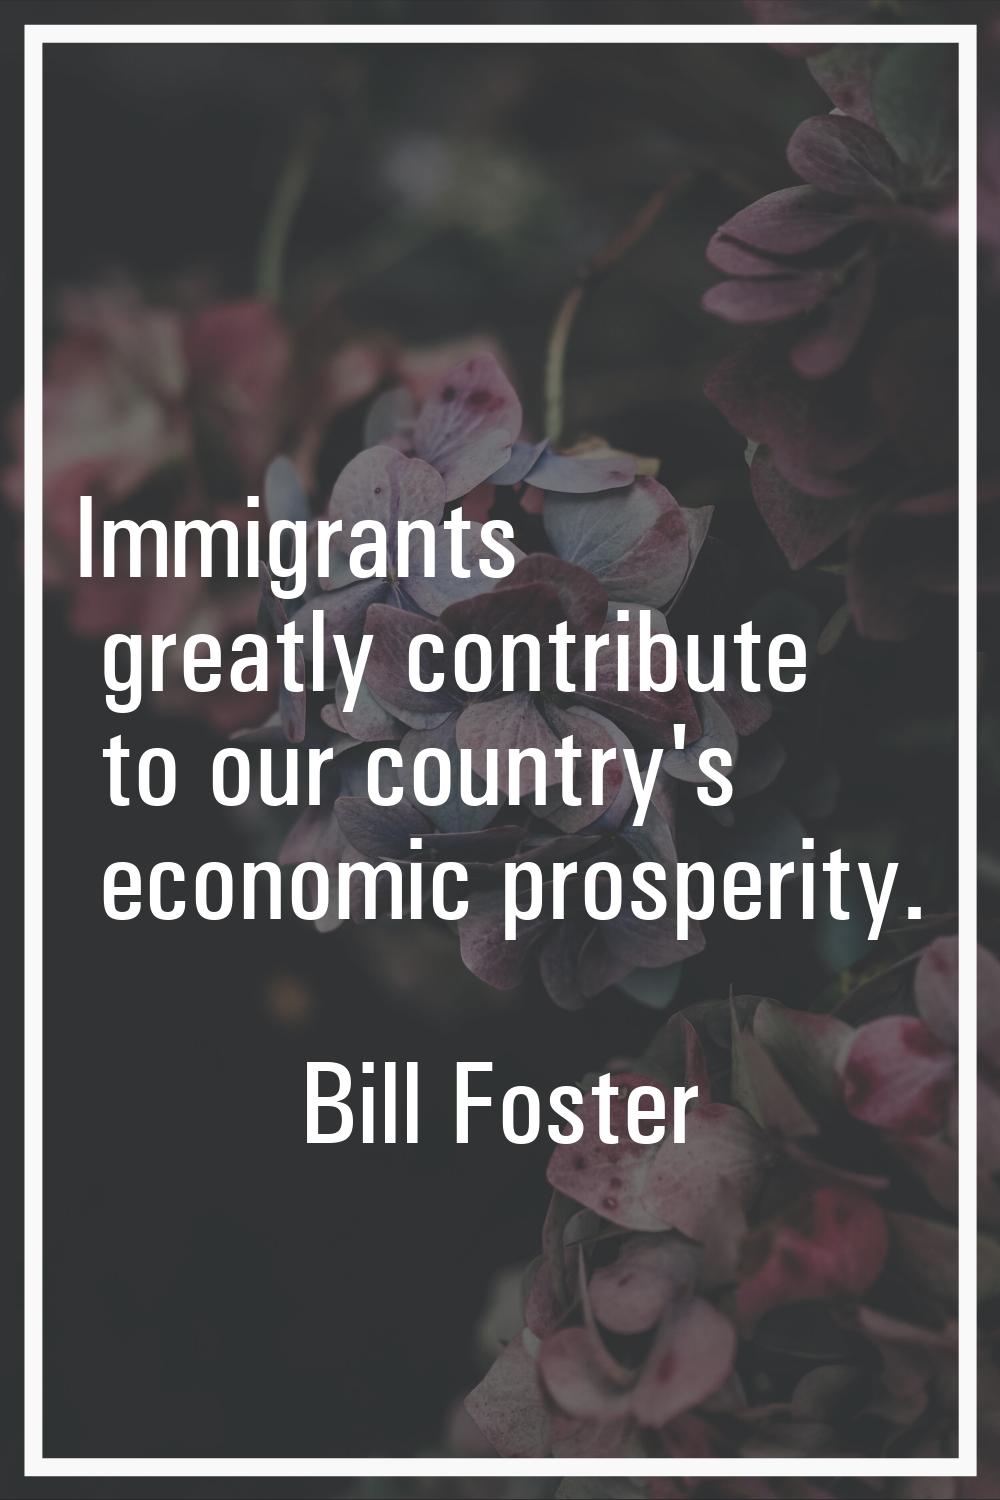 Immigrants greatly contribute to our country's economic prosperity.